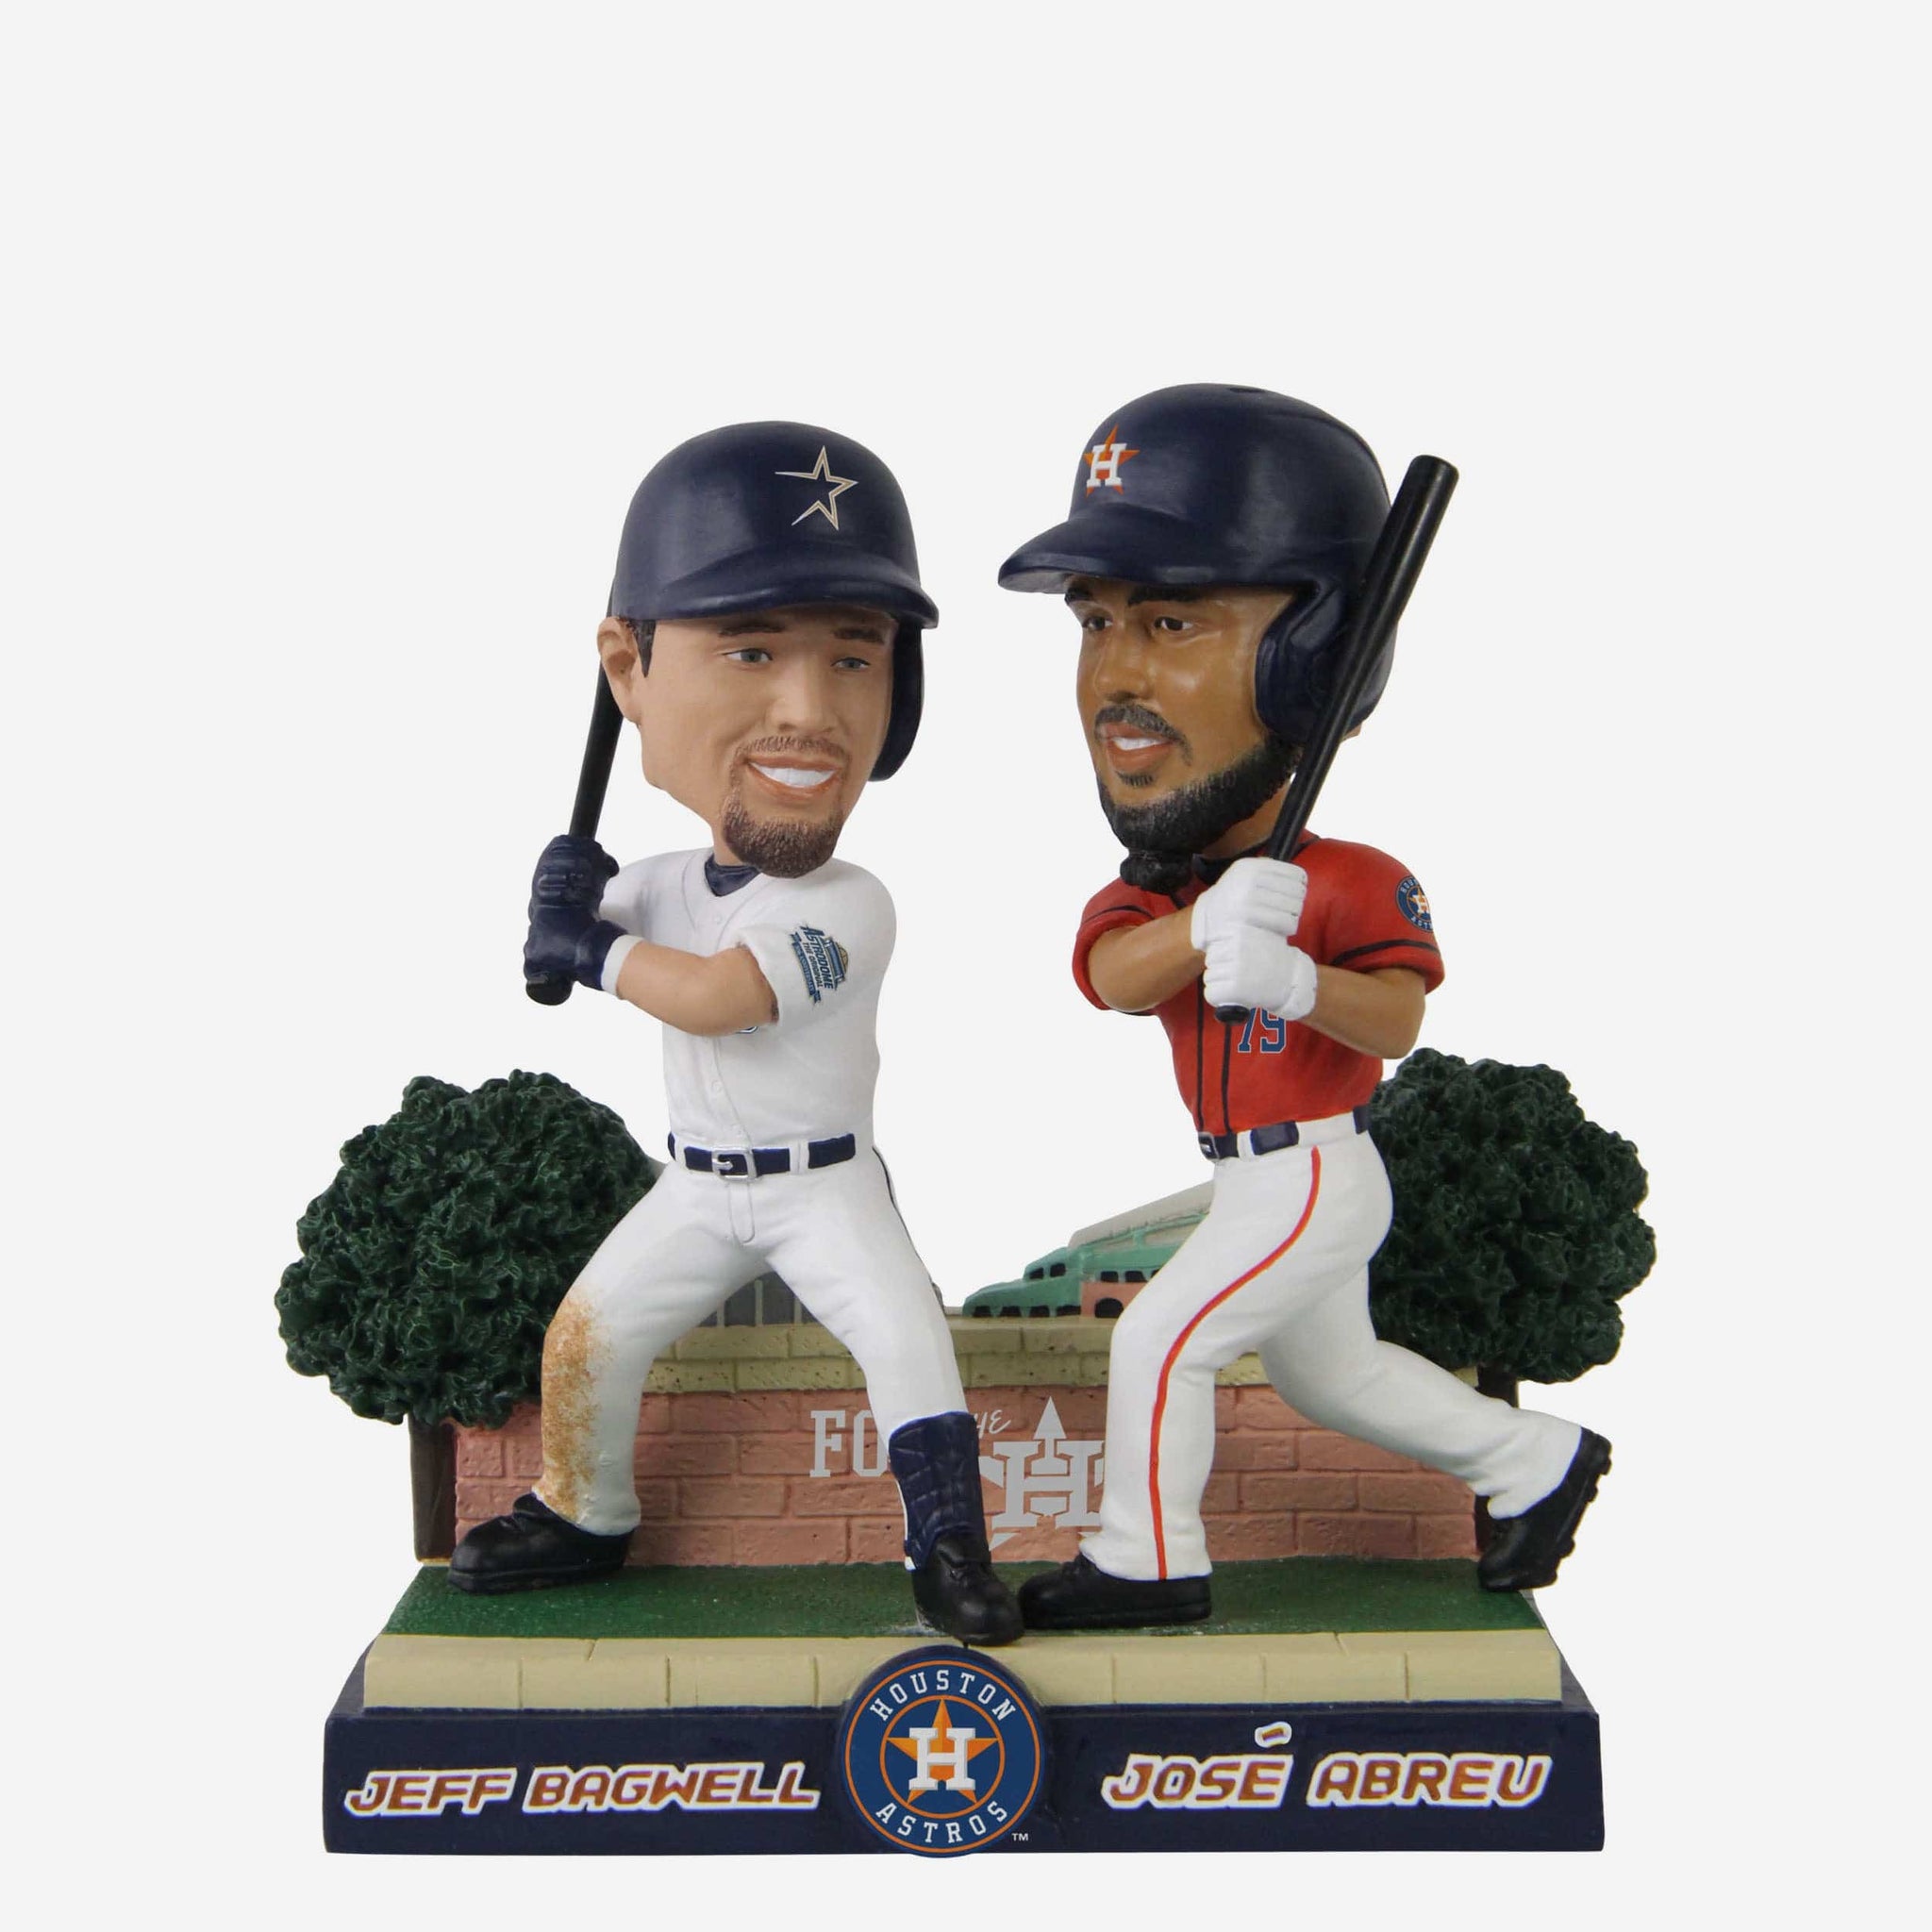 Jeff Bagwell & Jose Abreu Houston Astros Then and Now Bobblehead FOCO